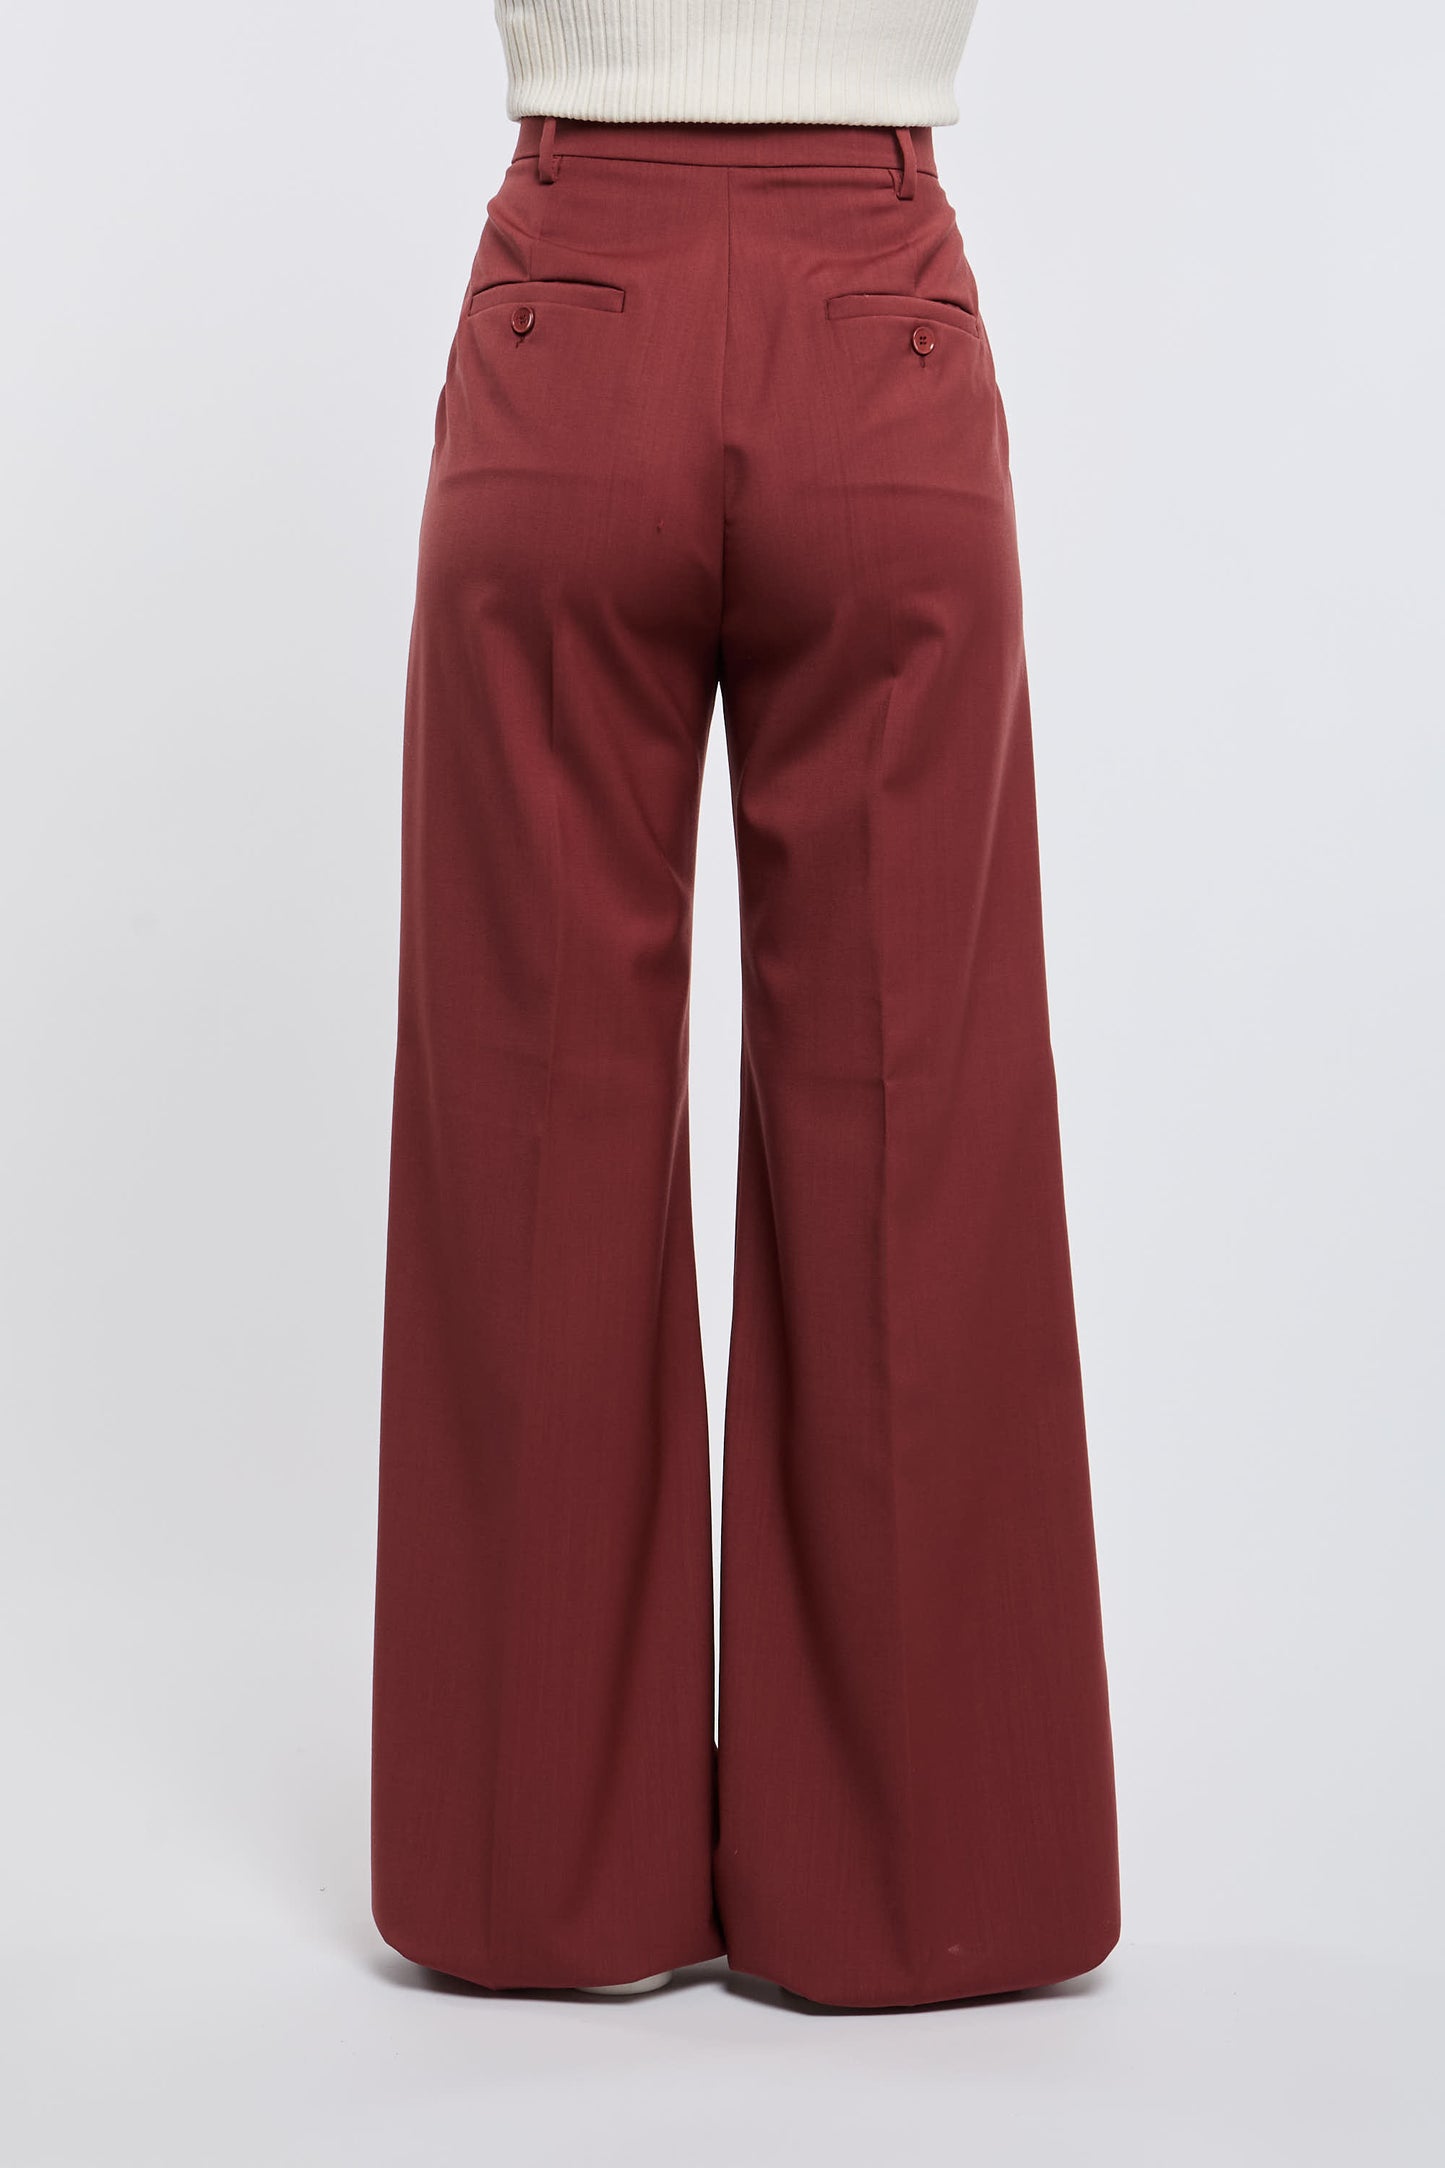  Max Mara Weekend Pantalone 100% Wv Rosso Rosso Donna - 5